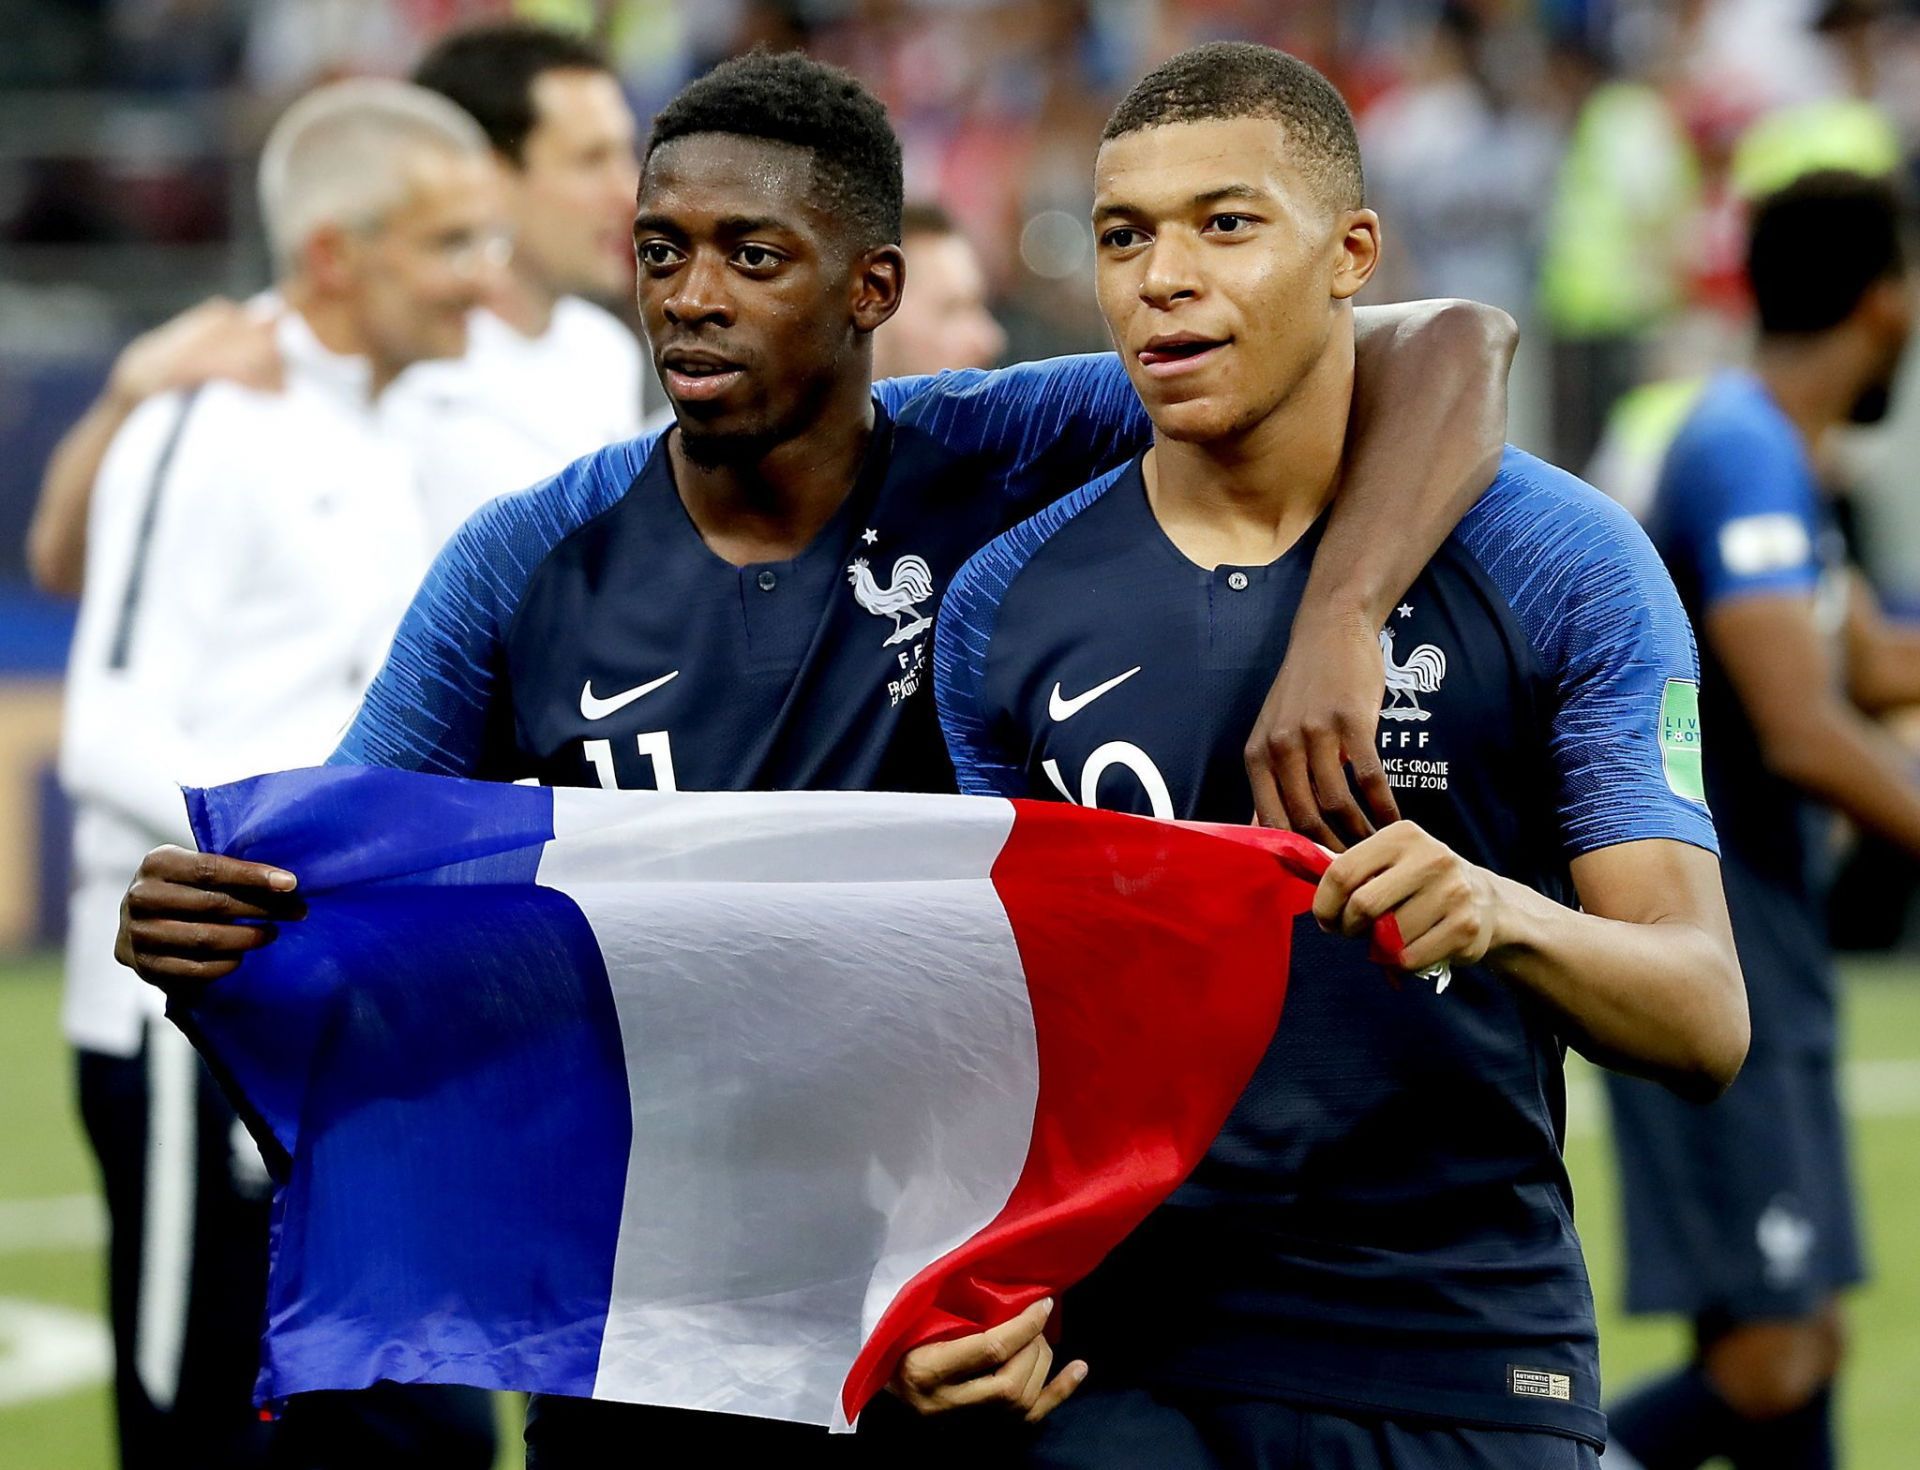 Ousmane Dembele and Kylian Mbappe (pic cred:Marca)